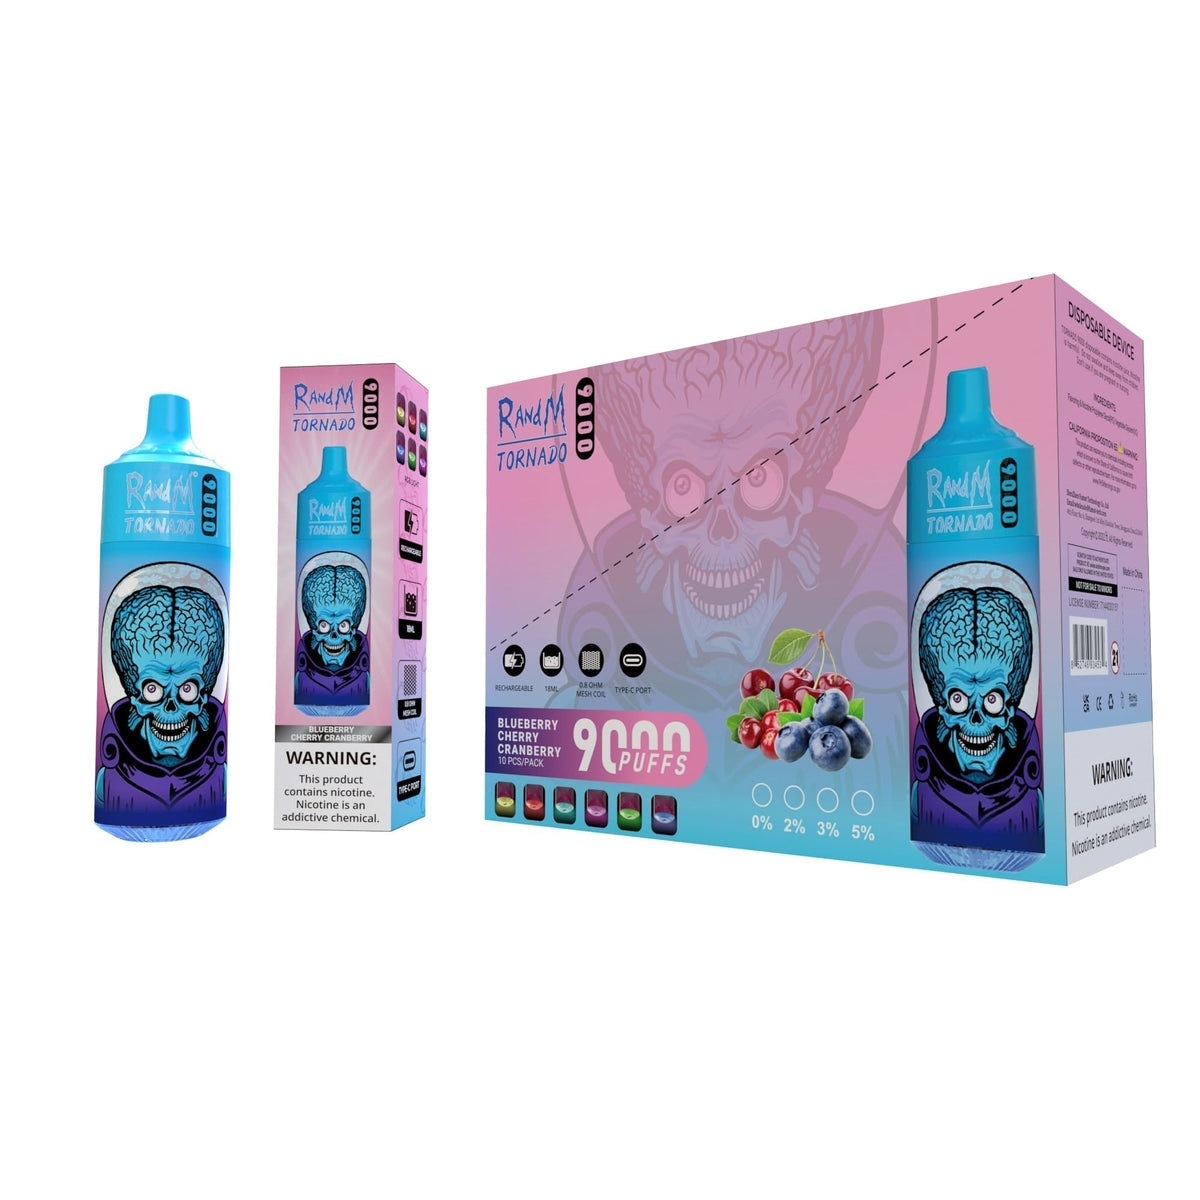 Zero Nicotine R and M Tornado 9000 Puffs Disposable Vape (Pack of 10) - Clouds Vapes